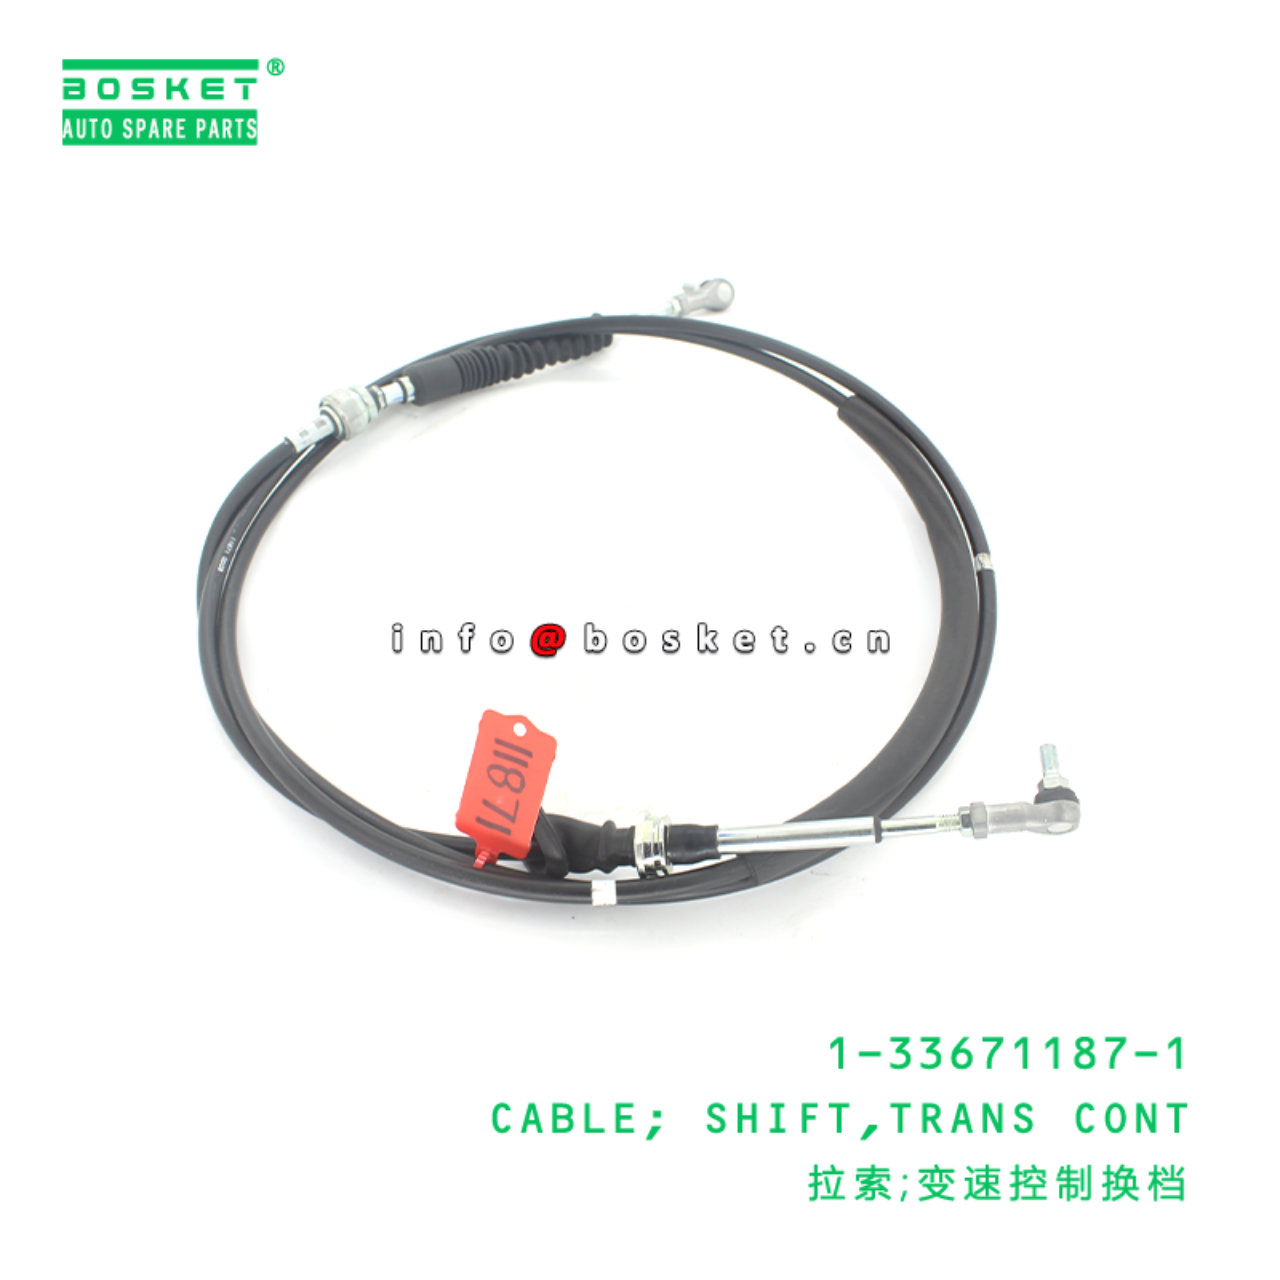 1-33671187-1 Transmission Control Shift Cable Suitable for ISUZU FVR FXR GXR 1336711871